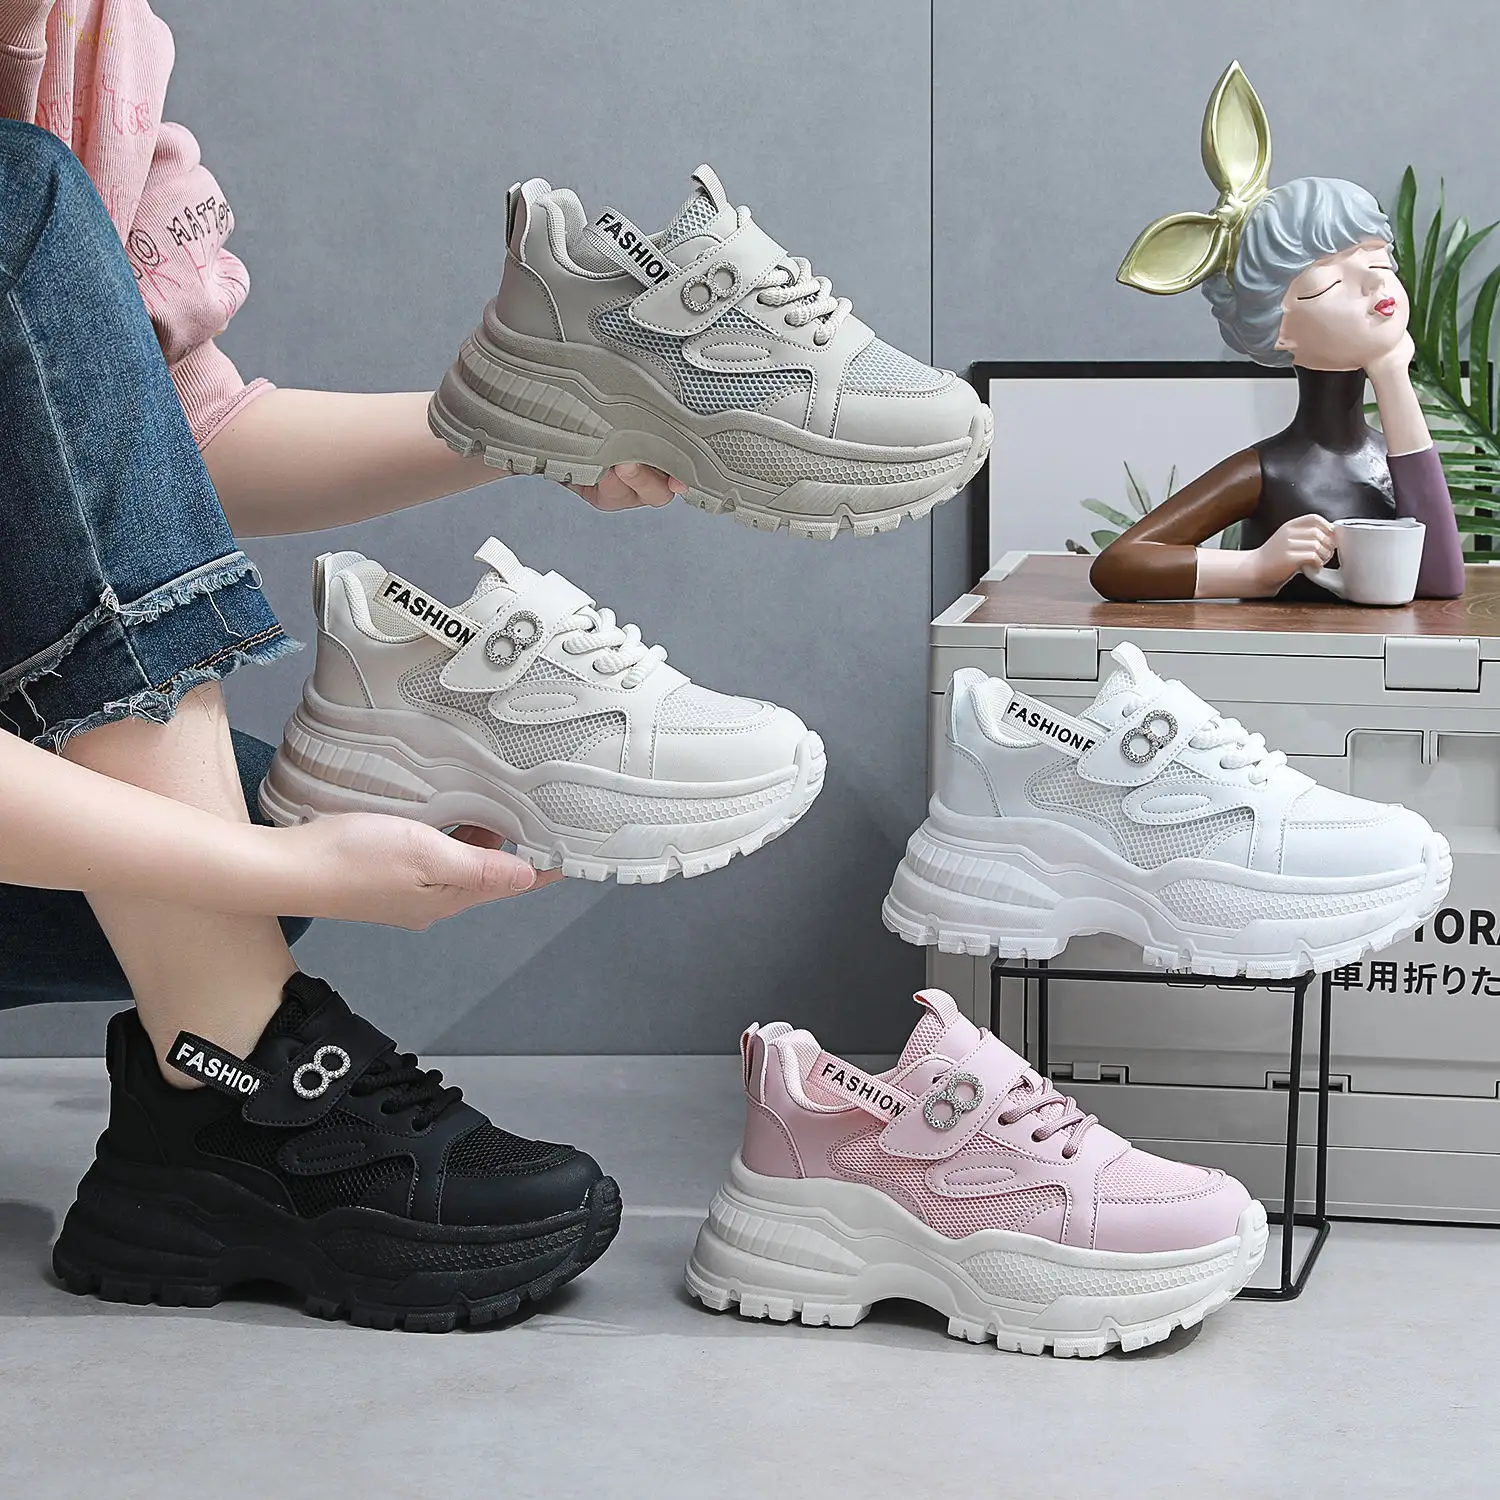 China Factory Manufacturer Sale Sneakers Online Custom Luxury Sneaker Woman Shoes